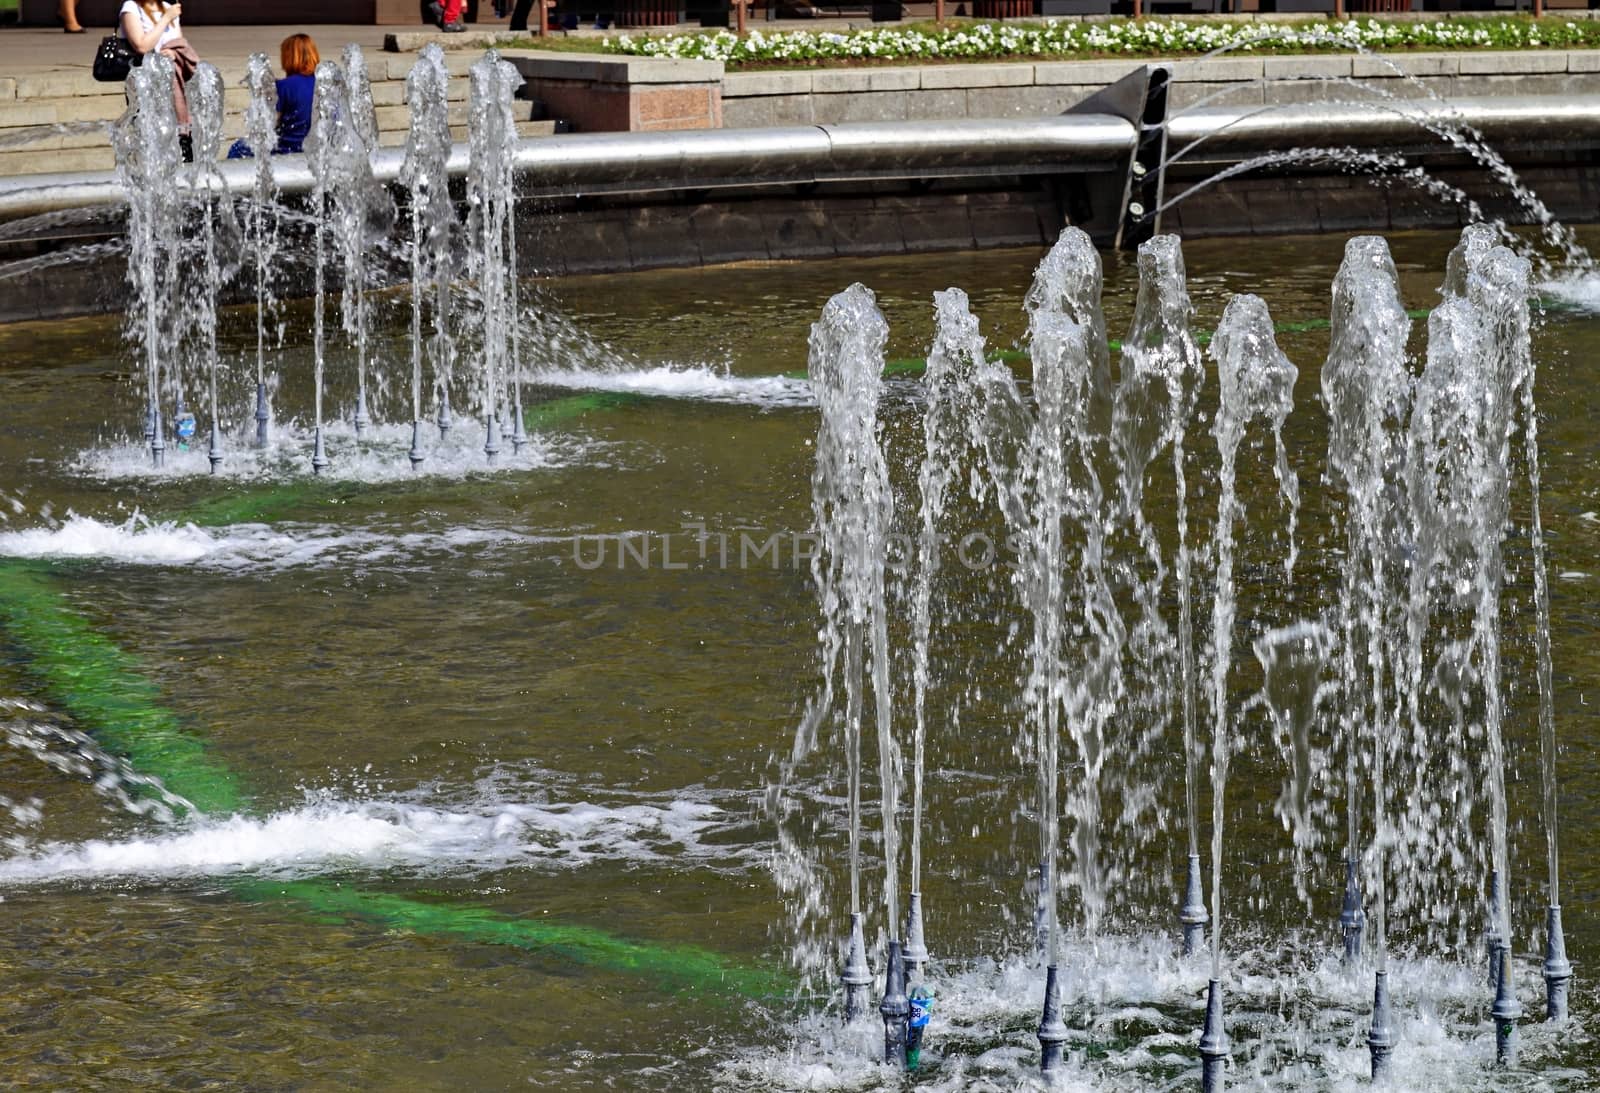 fountains in the city Park